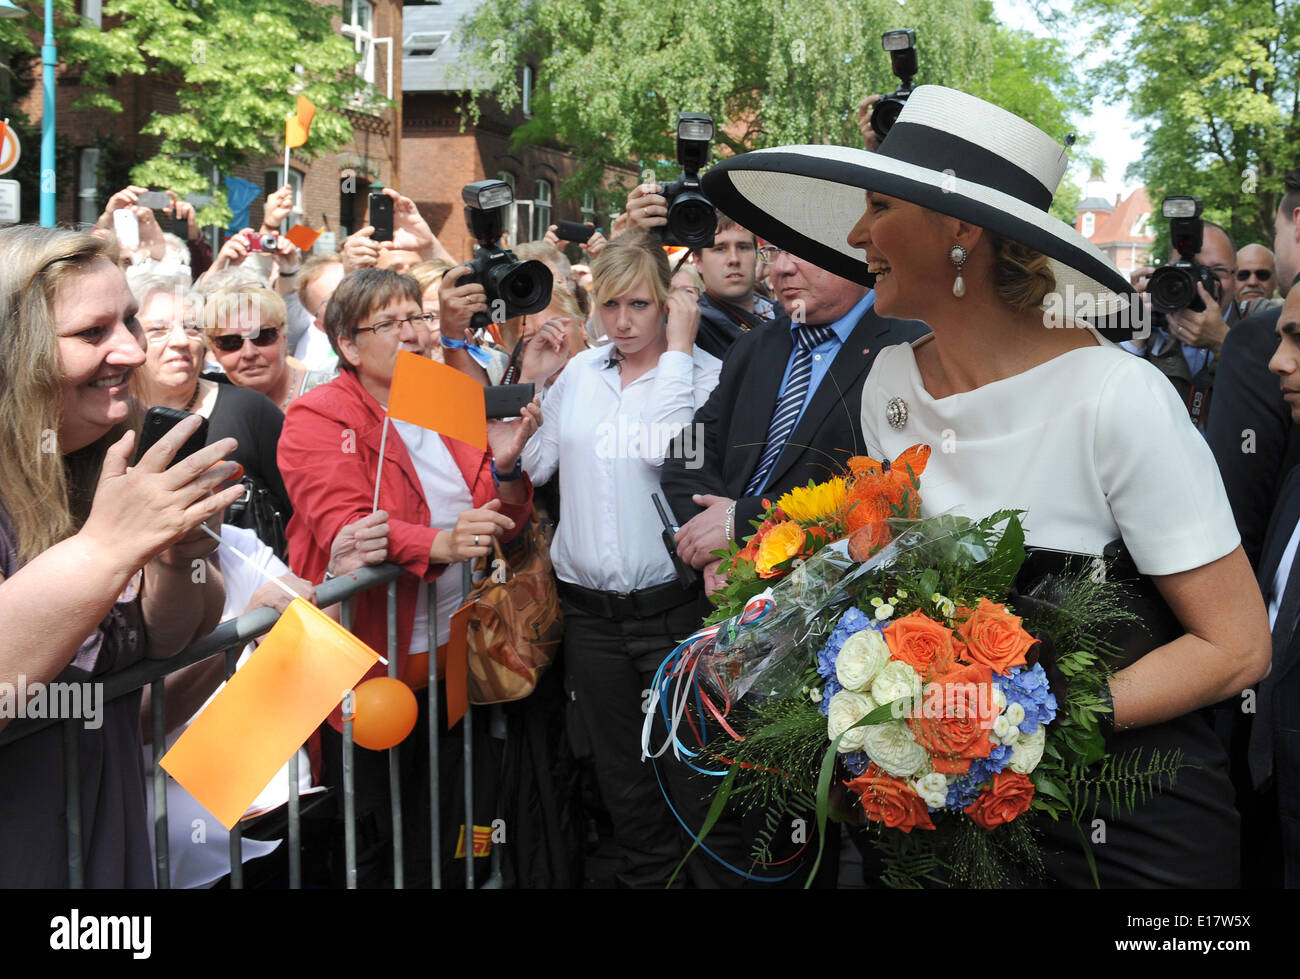 Leer, Germany. 26th May, 2014. Dutch Queen Maxima smiles in Leer, Germany, 26 May 2014. The royal couple is on a two-day visit to Germany. Photo: CARMEN JASPERSEN/dpa/Alamy Live News Stock Photo